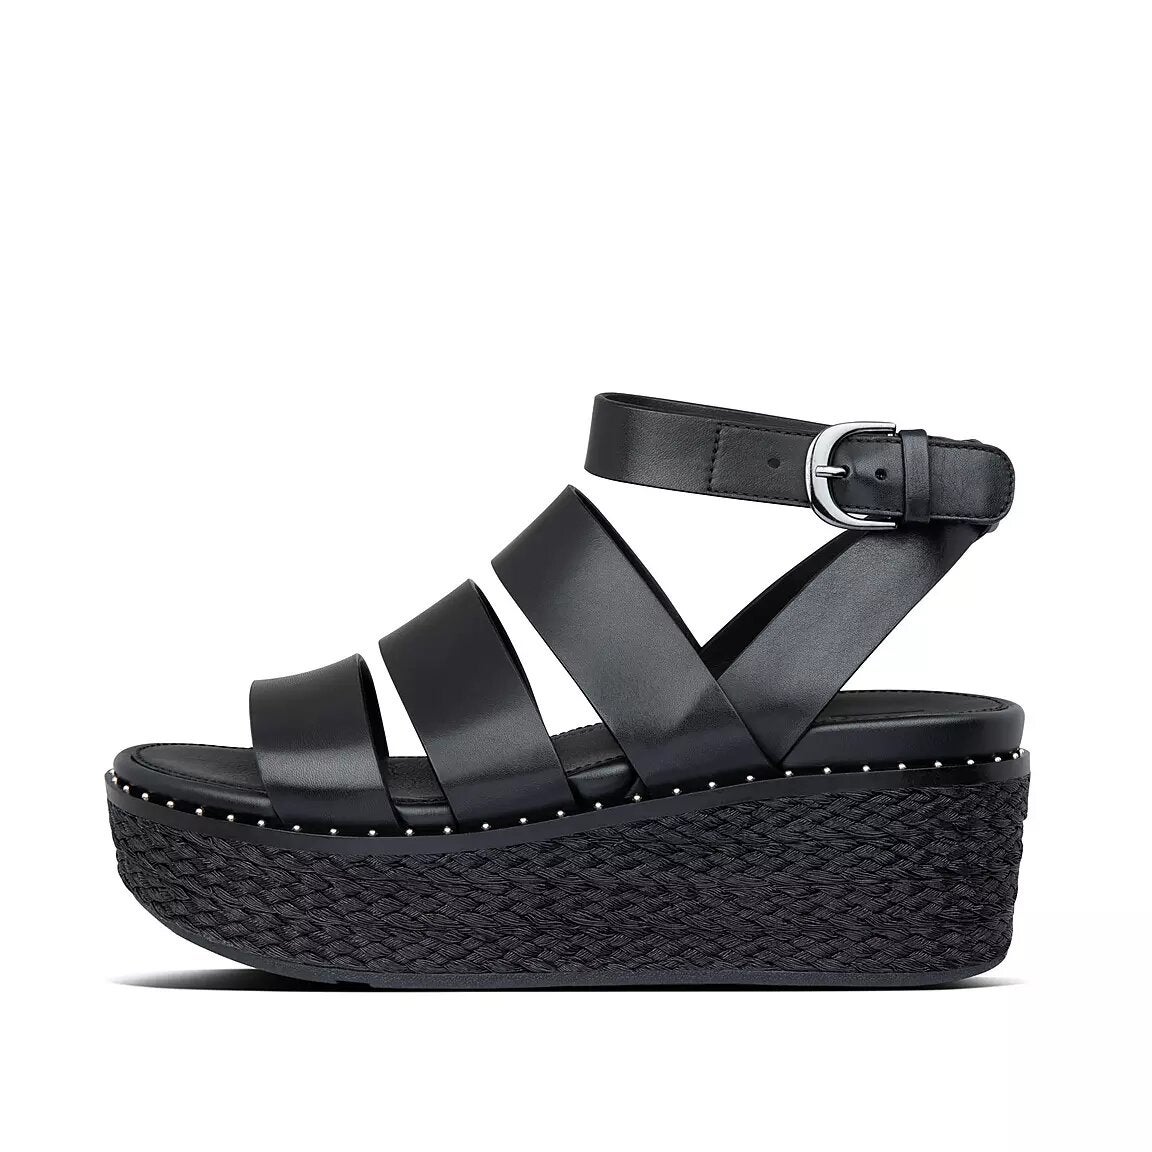 These Are The Comfiest Platform Sandals You’ll Ever Own